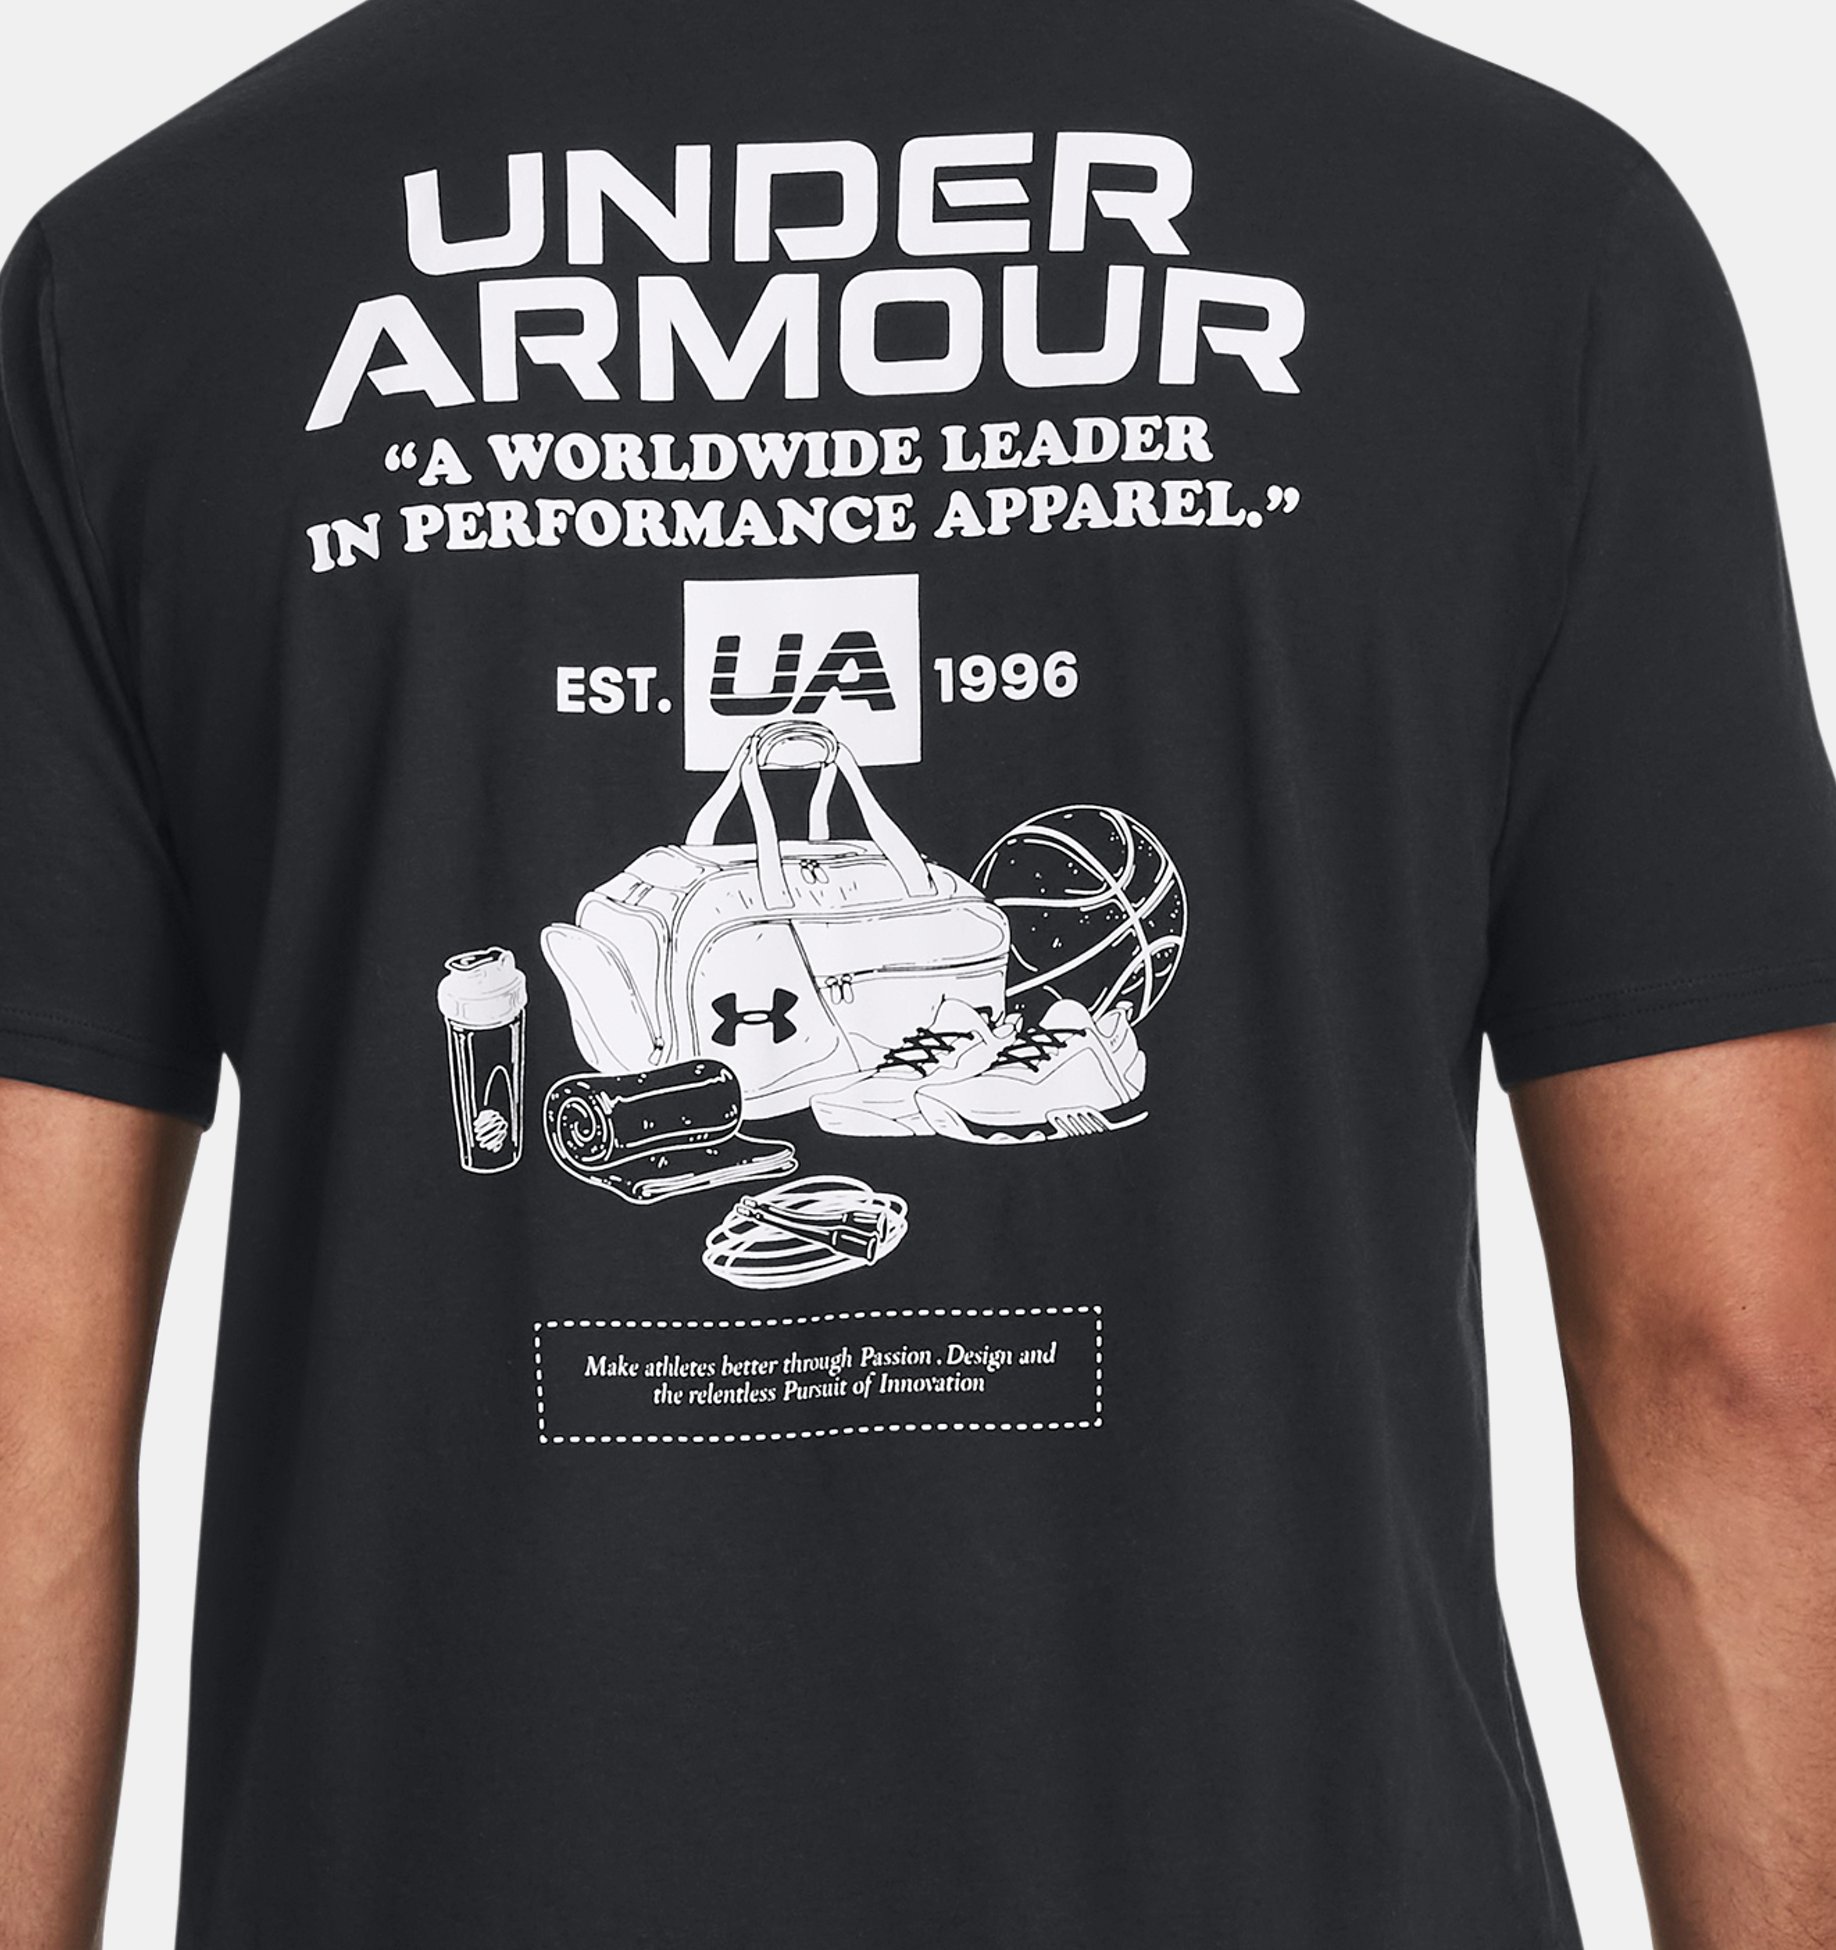 https://underarmour.scene7.com/is/image/Underarmour/V5-1373993-001_BC?rp=standard-0pad|pdpZoomDesktop&scl=0.72&fmt=jpg&qlt=85&resMode=sharp2&cache=on,on&bgc=f0f0f0&wid=1836&hei=1950&size=1500,1500